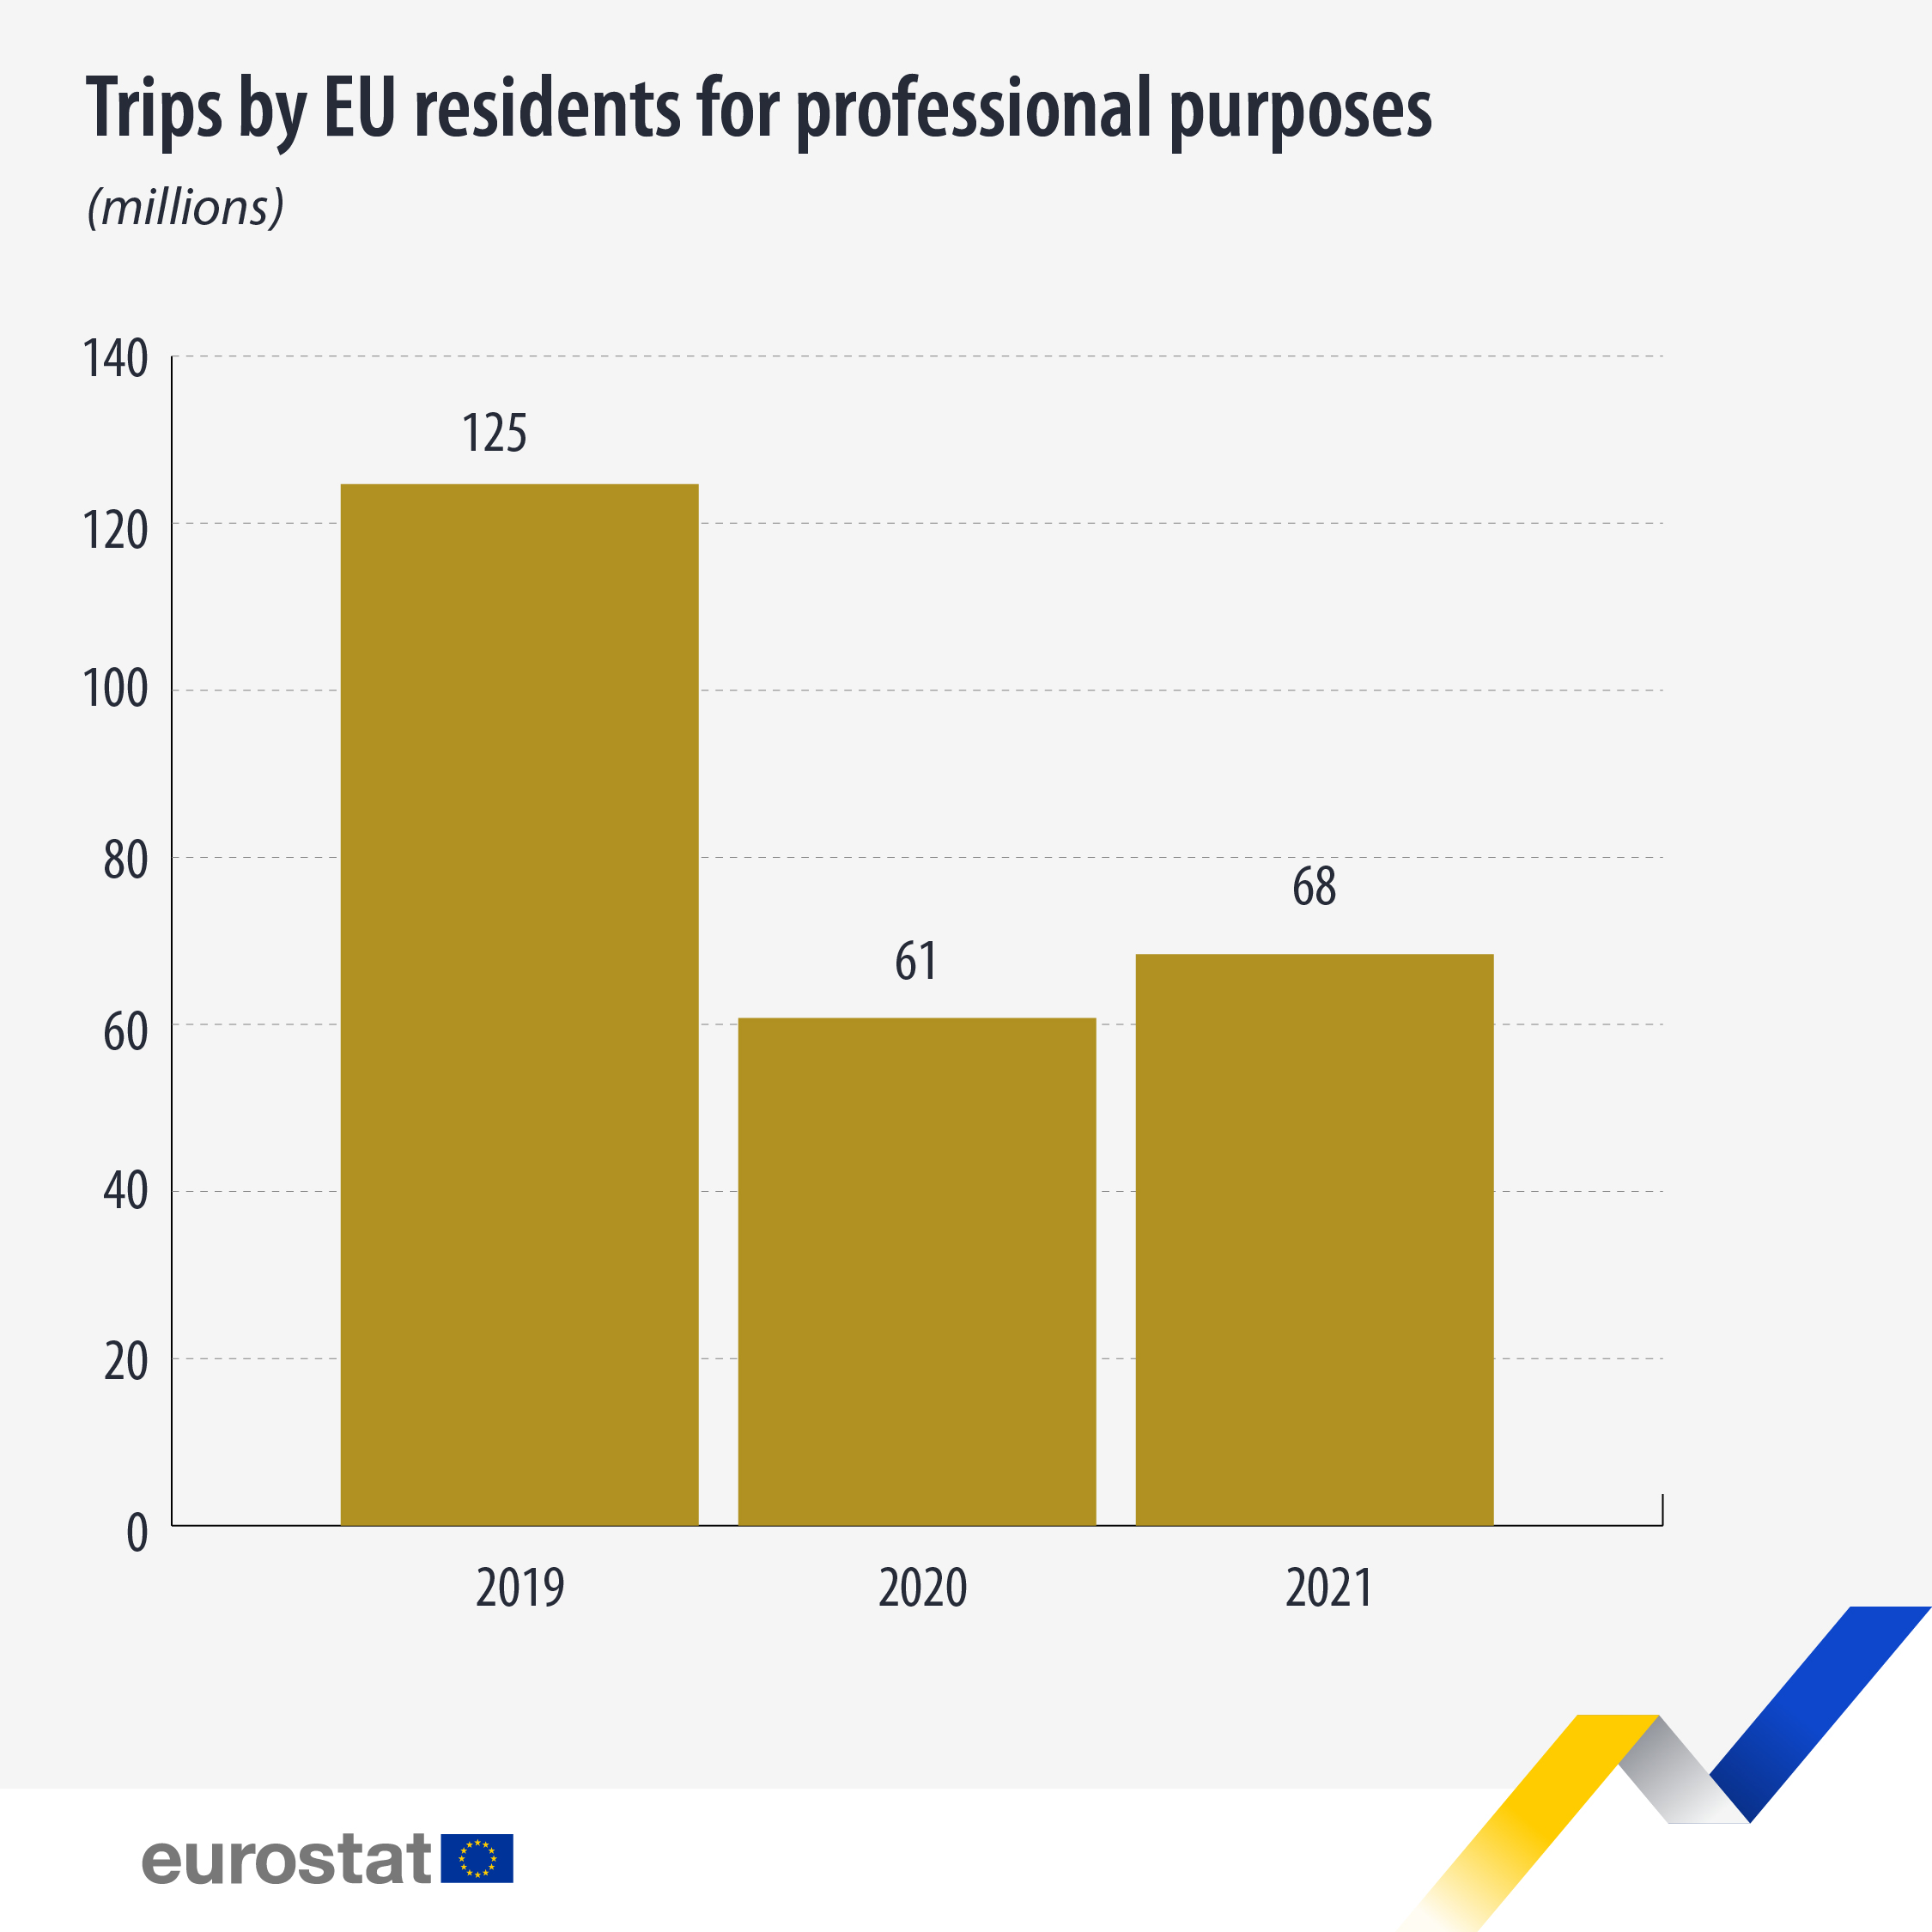 Bar graph: Trips by EU residents for professional purposes in 2019, 2020 and 2021, in millions